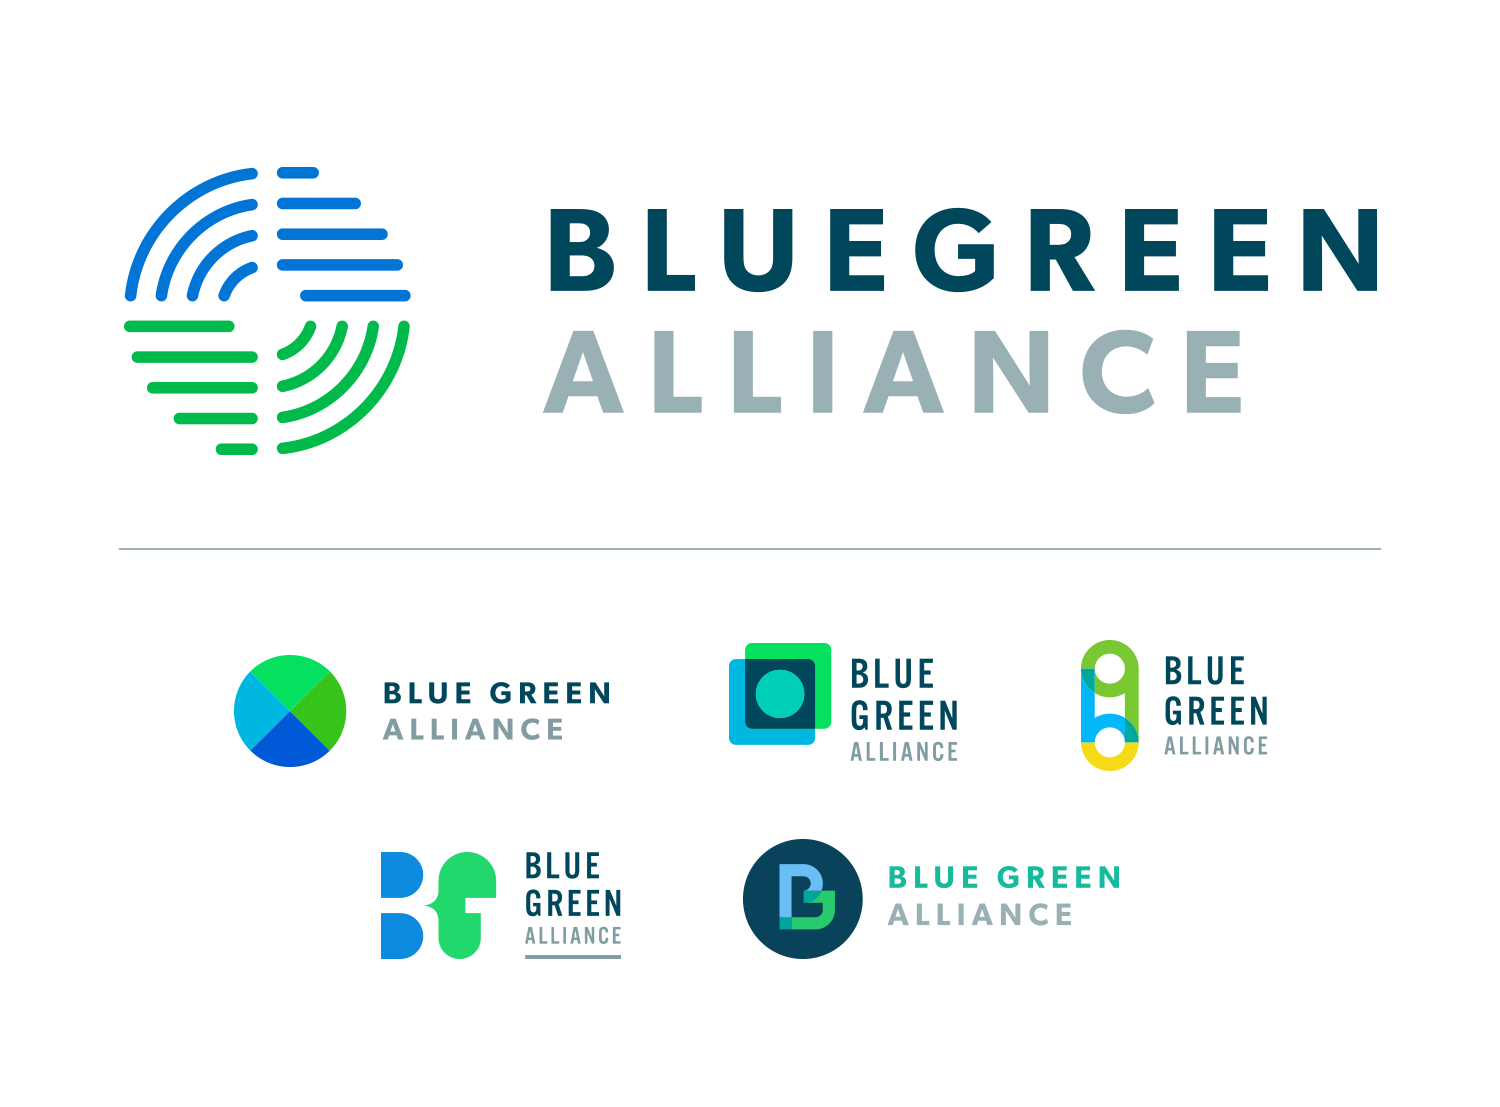 Final version and early sketches for the redesign of the BlueGreen Alliance logo